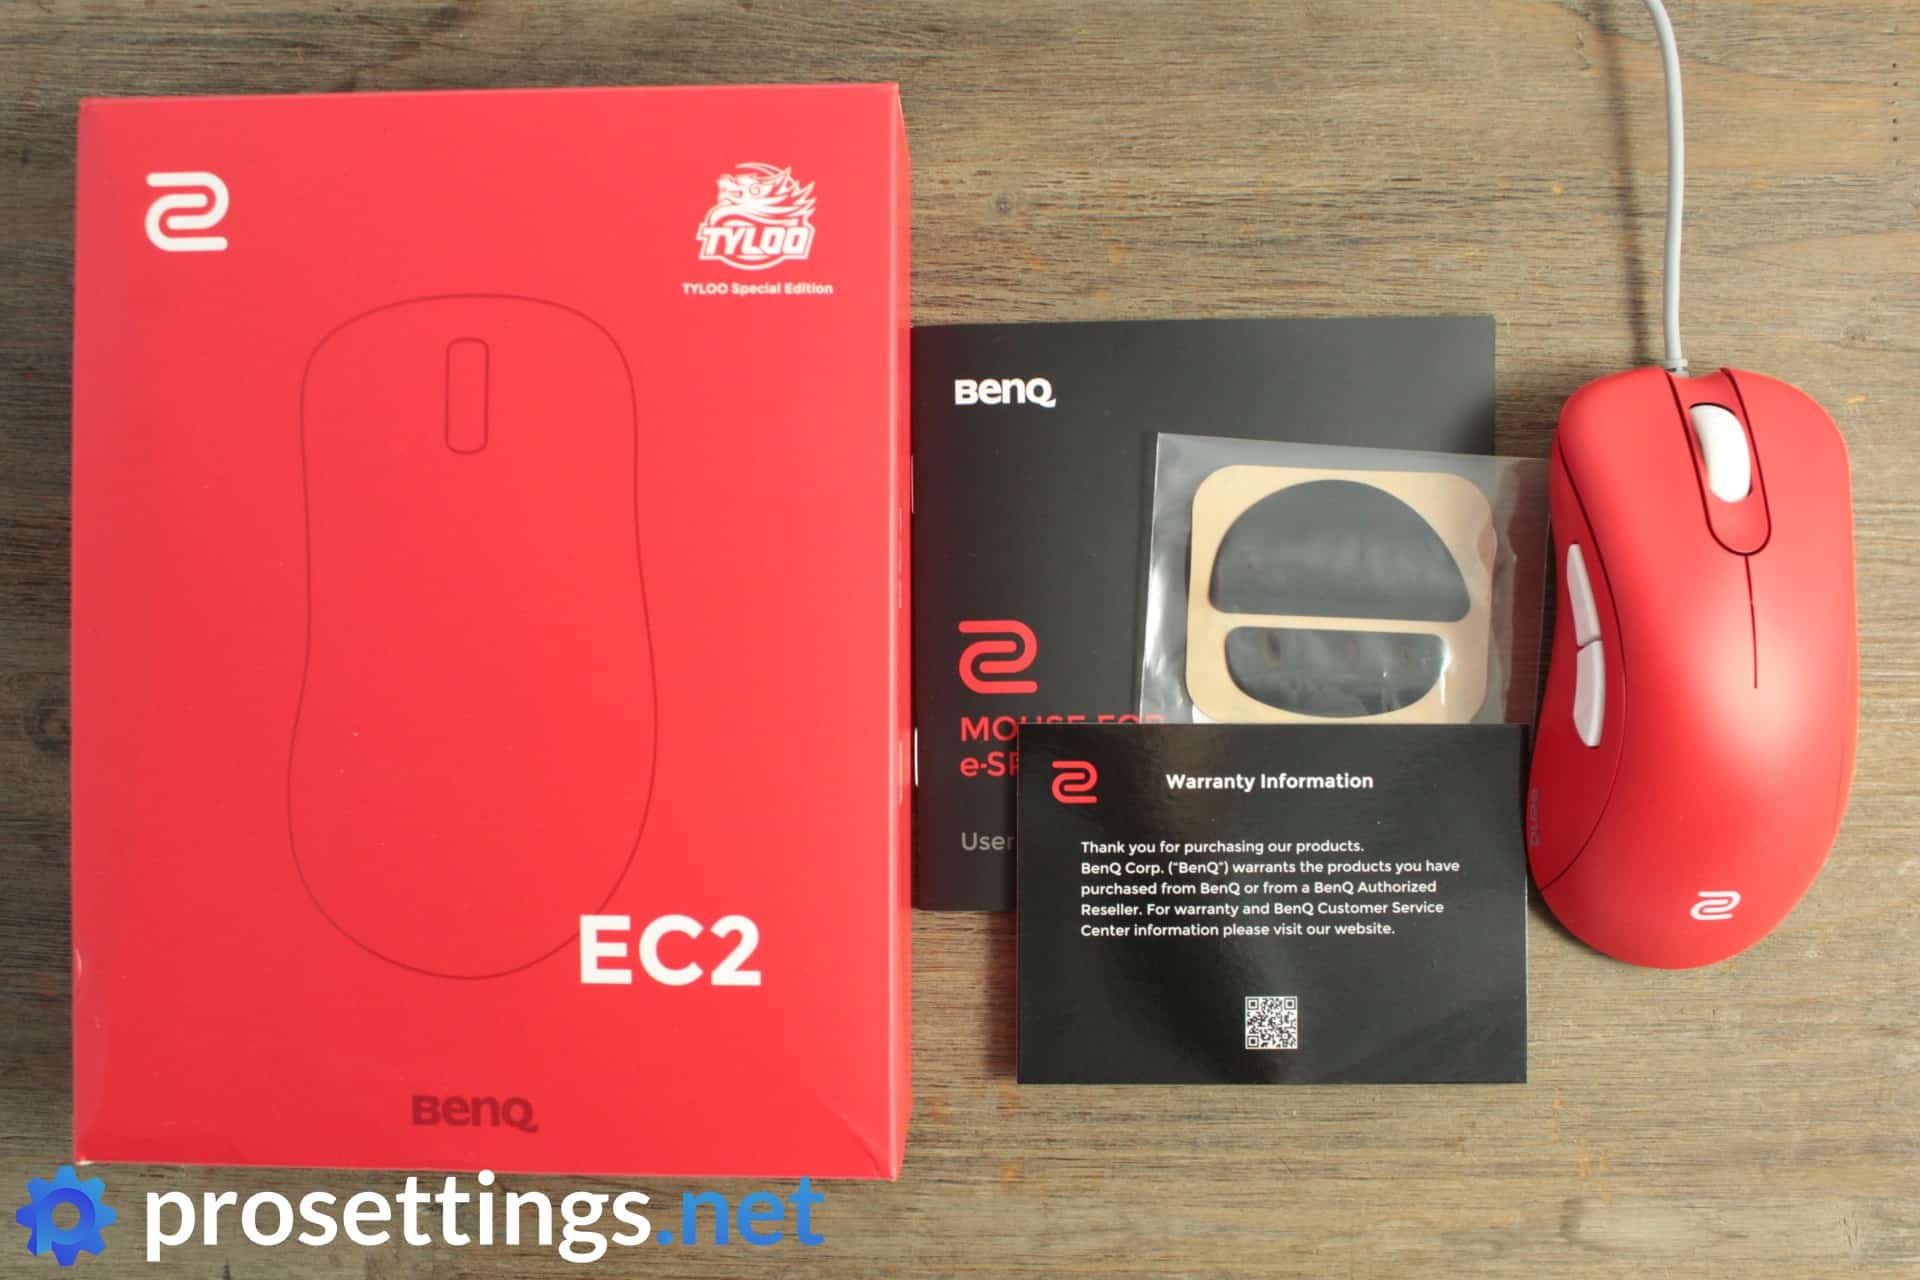 Zowie EC2 Tyloo Mouse Review Packaging